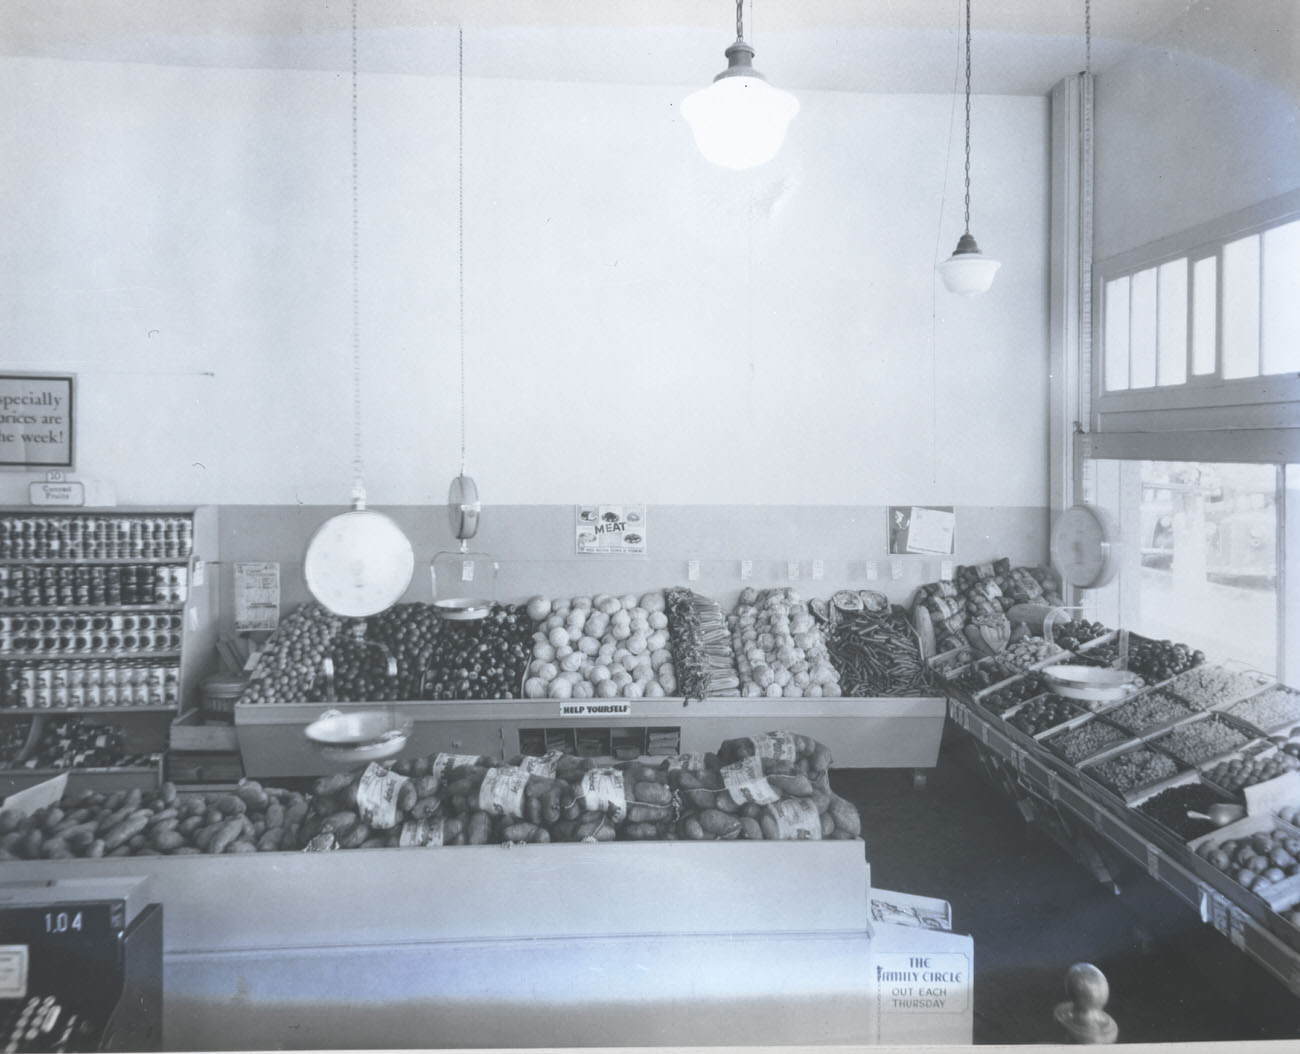 Produce Section at Safeway, 1942